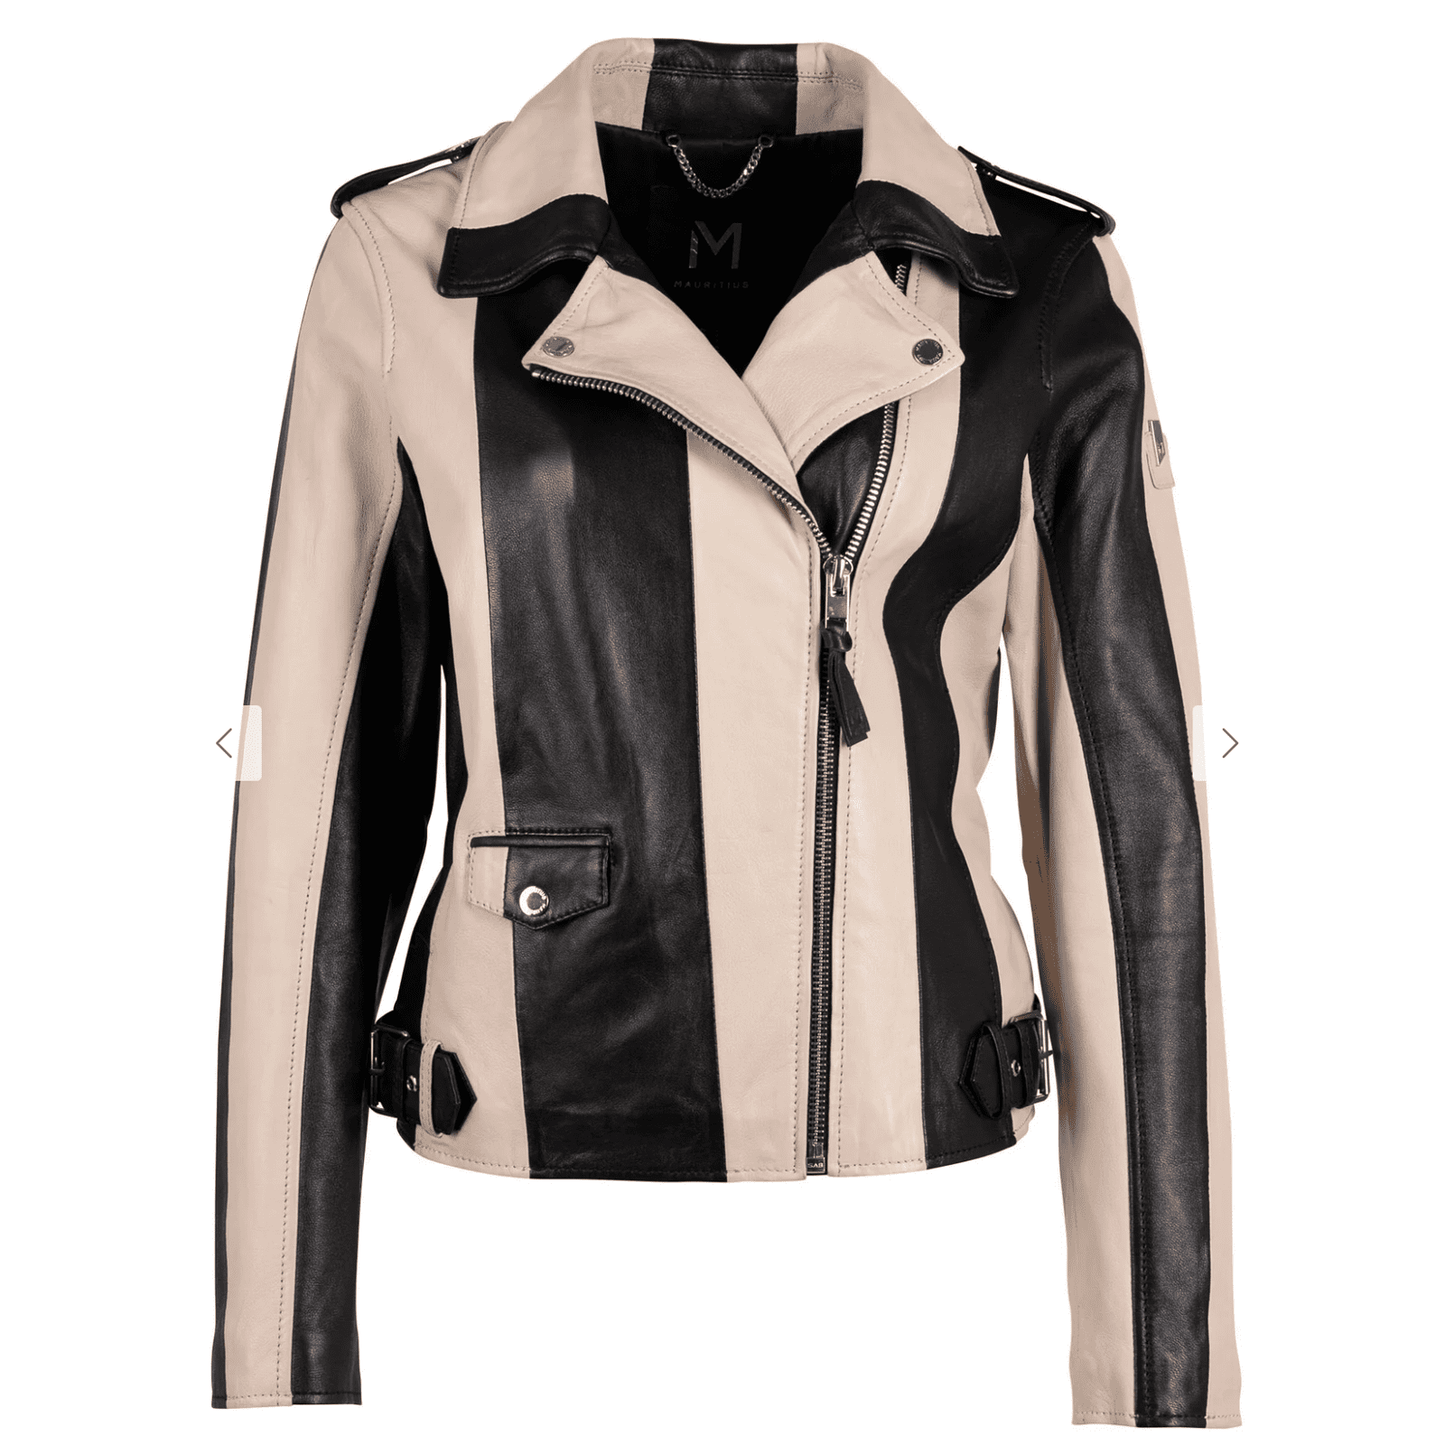 Mauritius Armilla CF Striped Leather Jacket in Black and Beige - Jaunts Boutique 